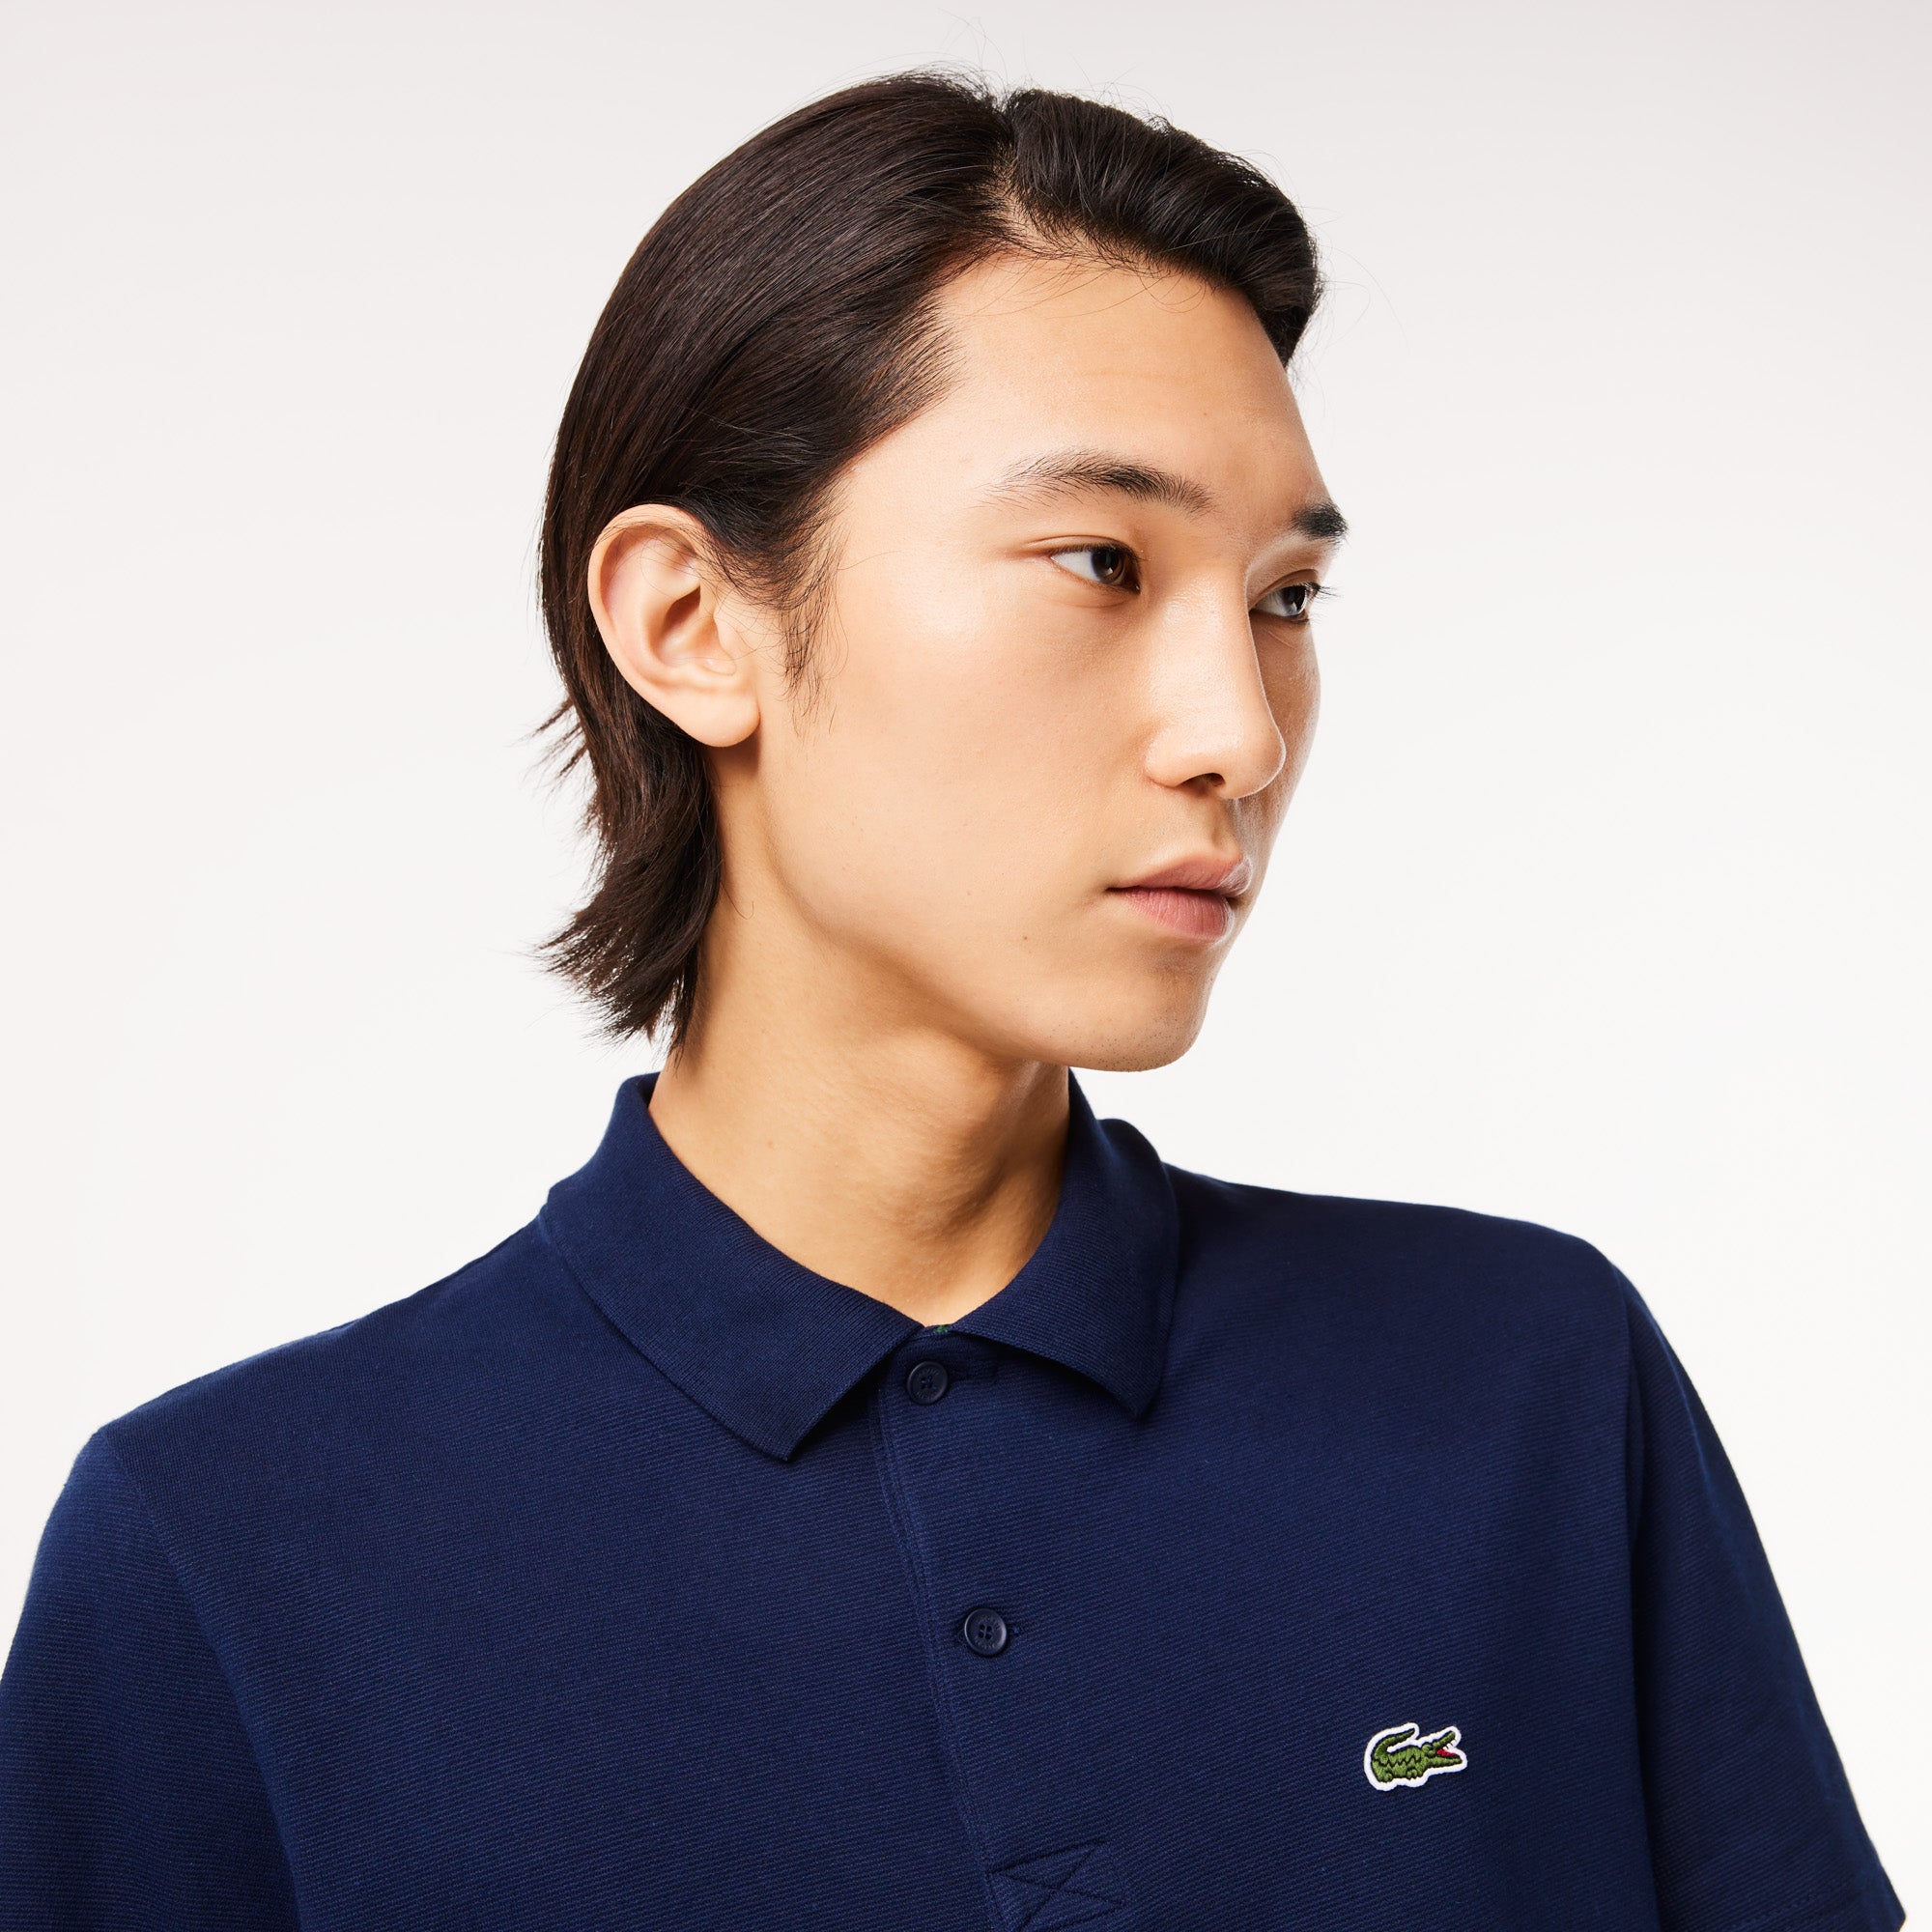 Lacoste Men's Regular Fit Polo in Ecological Stretch Cotton Navy Blue 